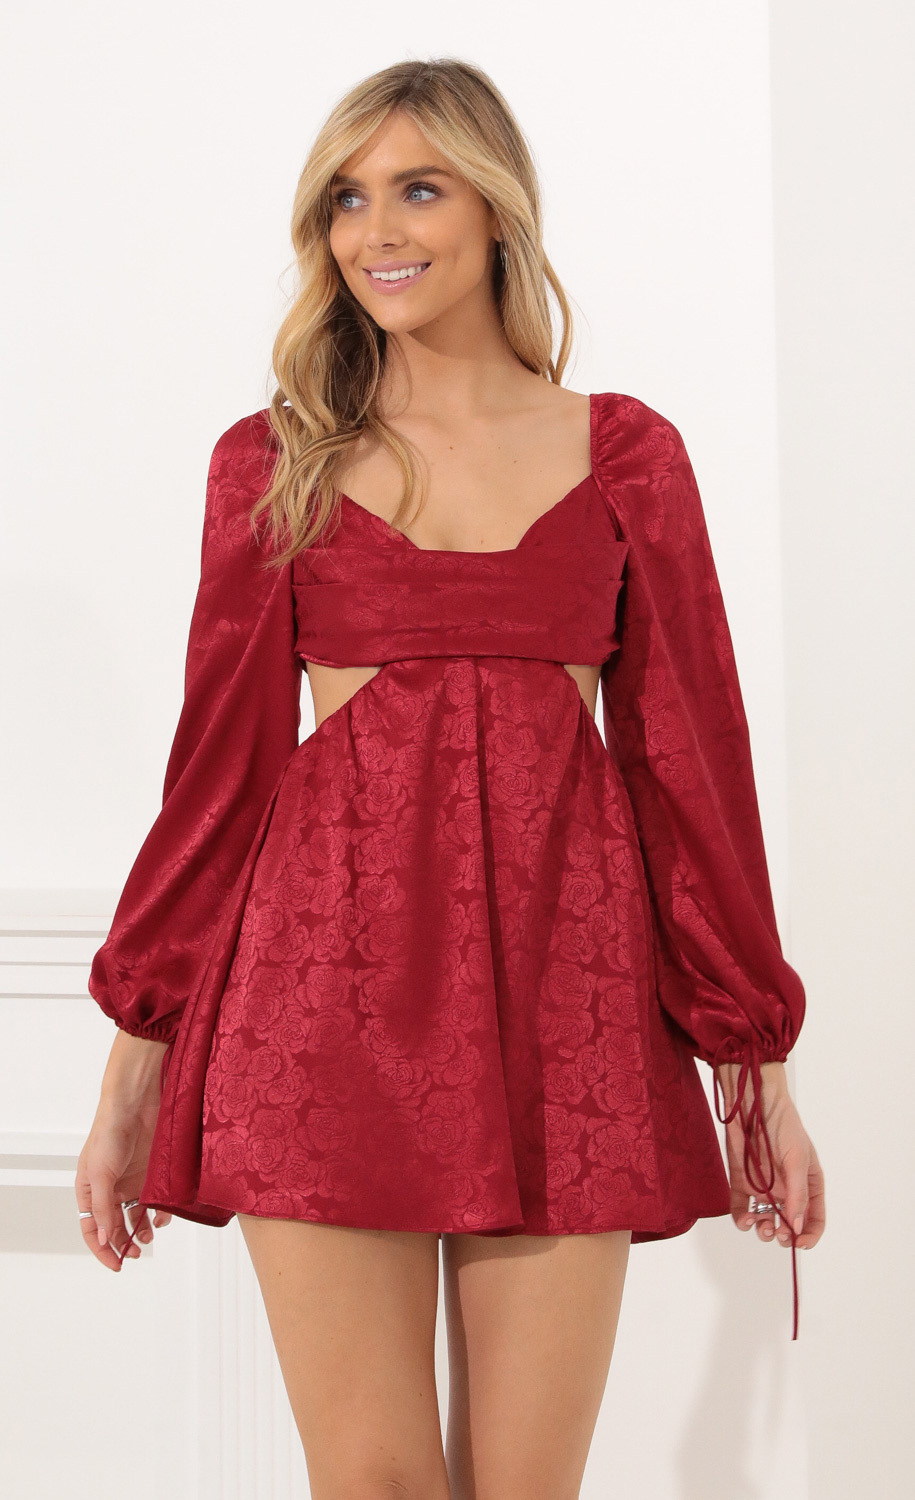 Krista Long Sleeve Fit and Flare Dress in Red Floral Satin